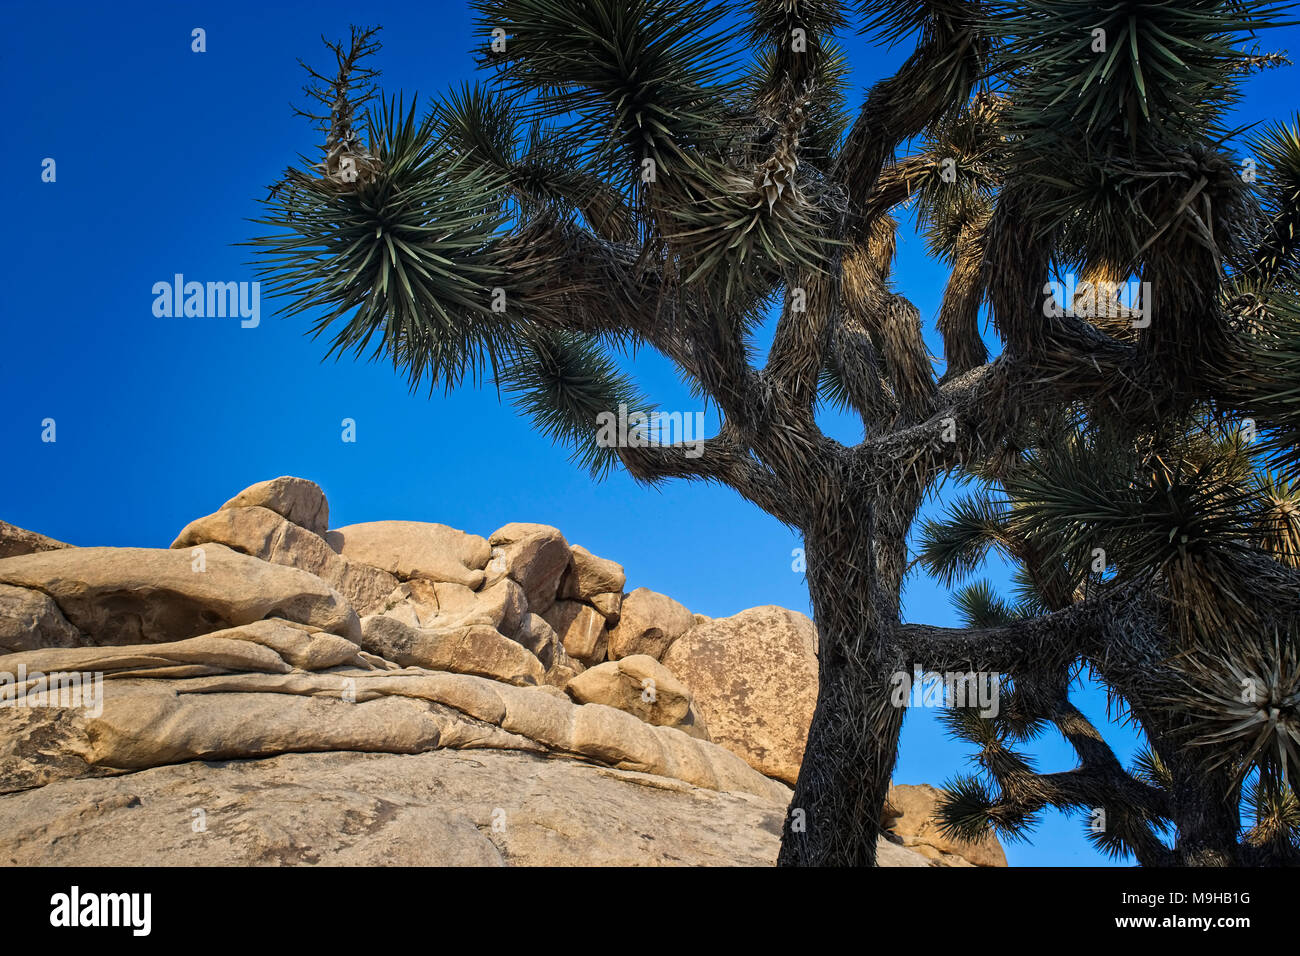 Single Joshua tree is dwarfed by the rock formations in Joshua tree national Park in Southern California’s Mojave Desert Stock Photo